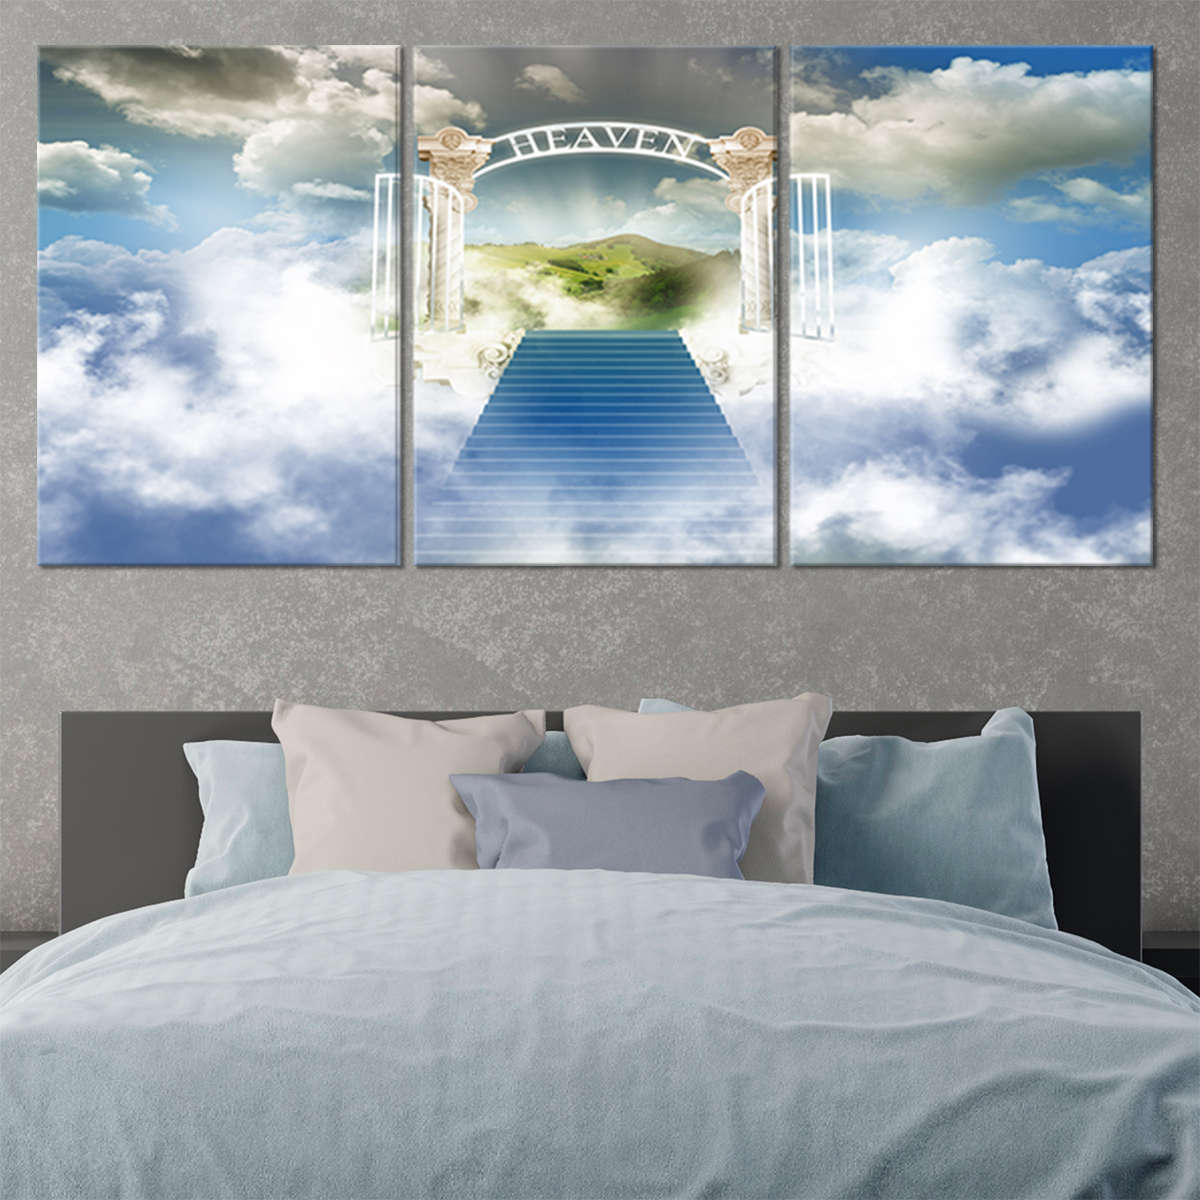 Stairway To Heaven Canvas Wall Art